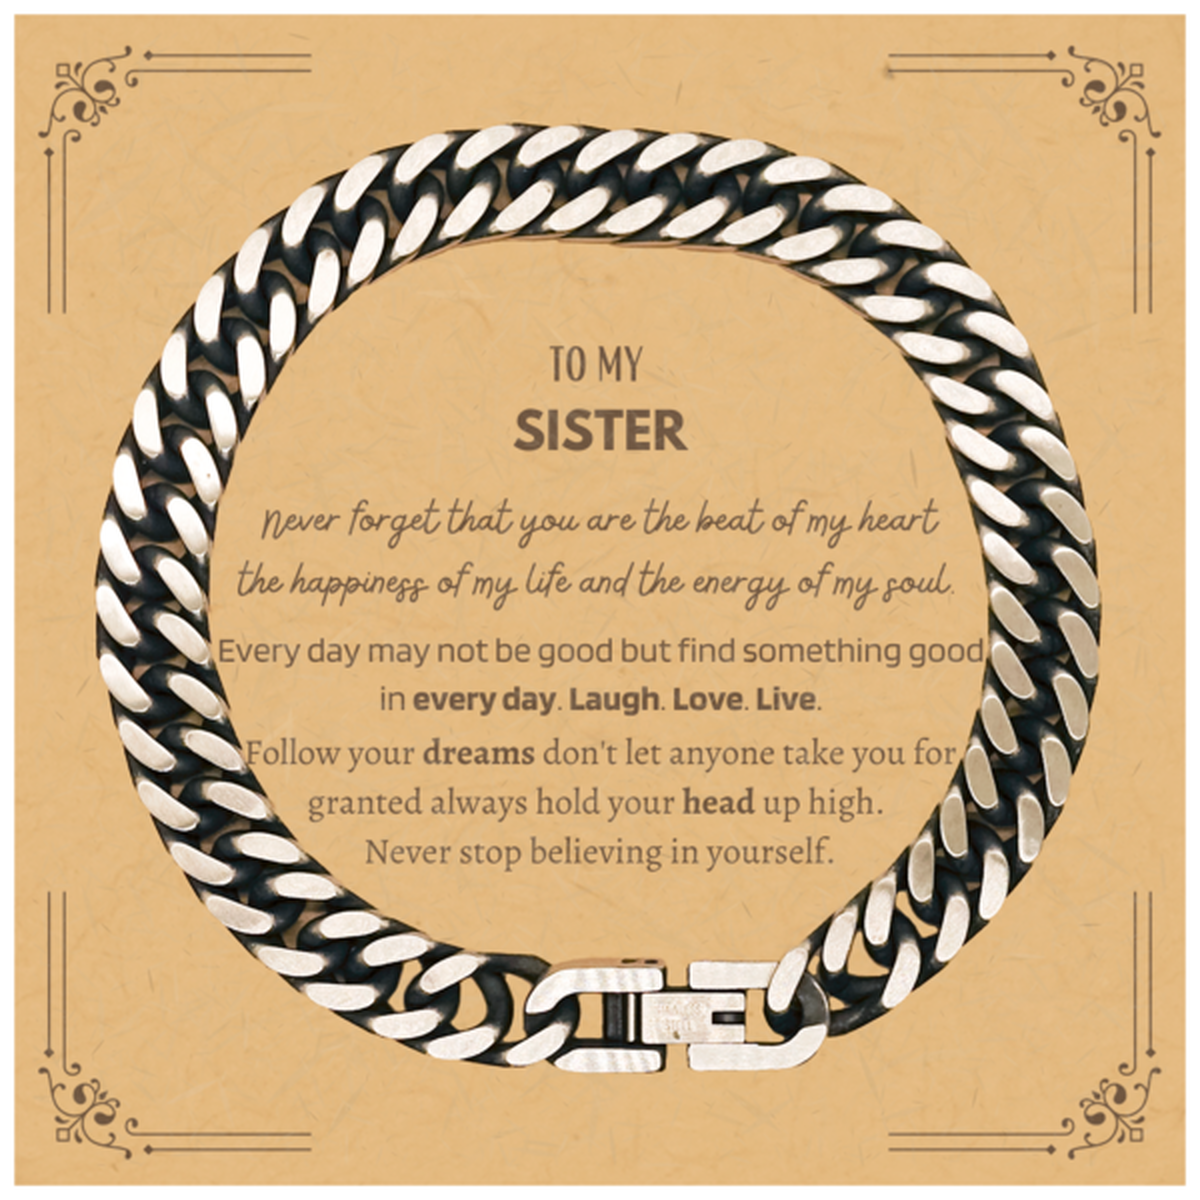 To My Sister Message Card Gifts, Christmas Sister Cuban Link Chain Bracelet Present, Birthday Unique Motivational For Sister, To My Sister Never forget that you are the beat of my heart the happiness of my life and the energy of my soul